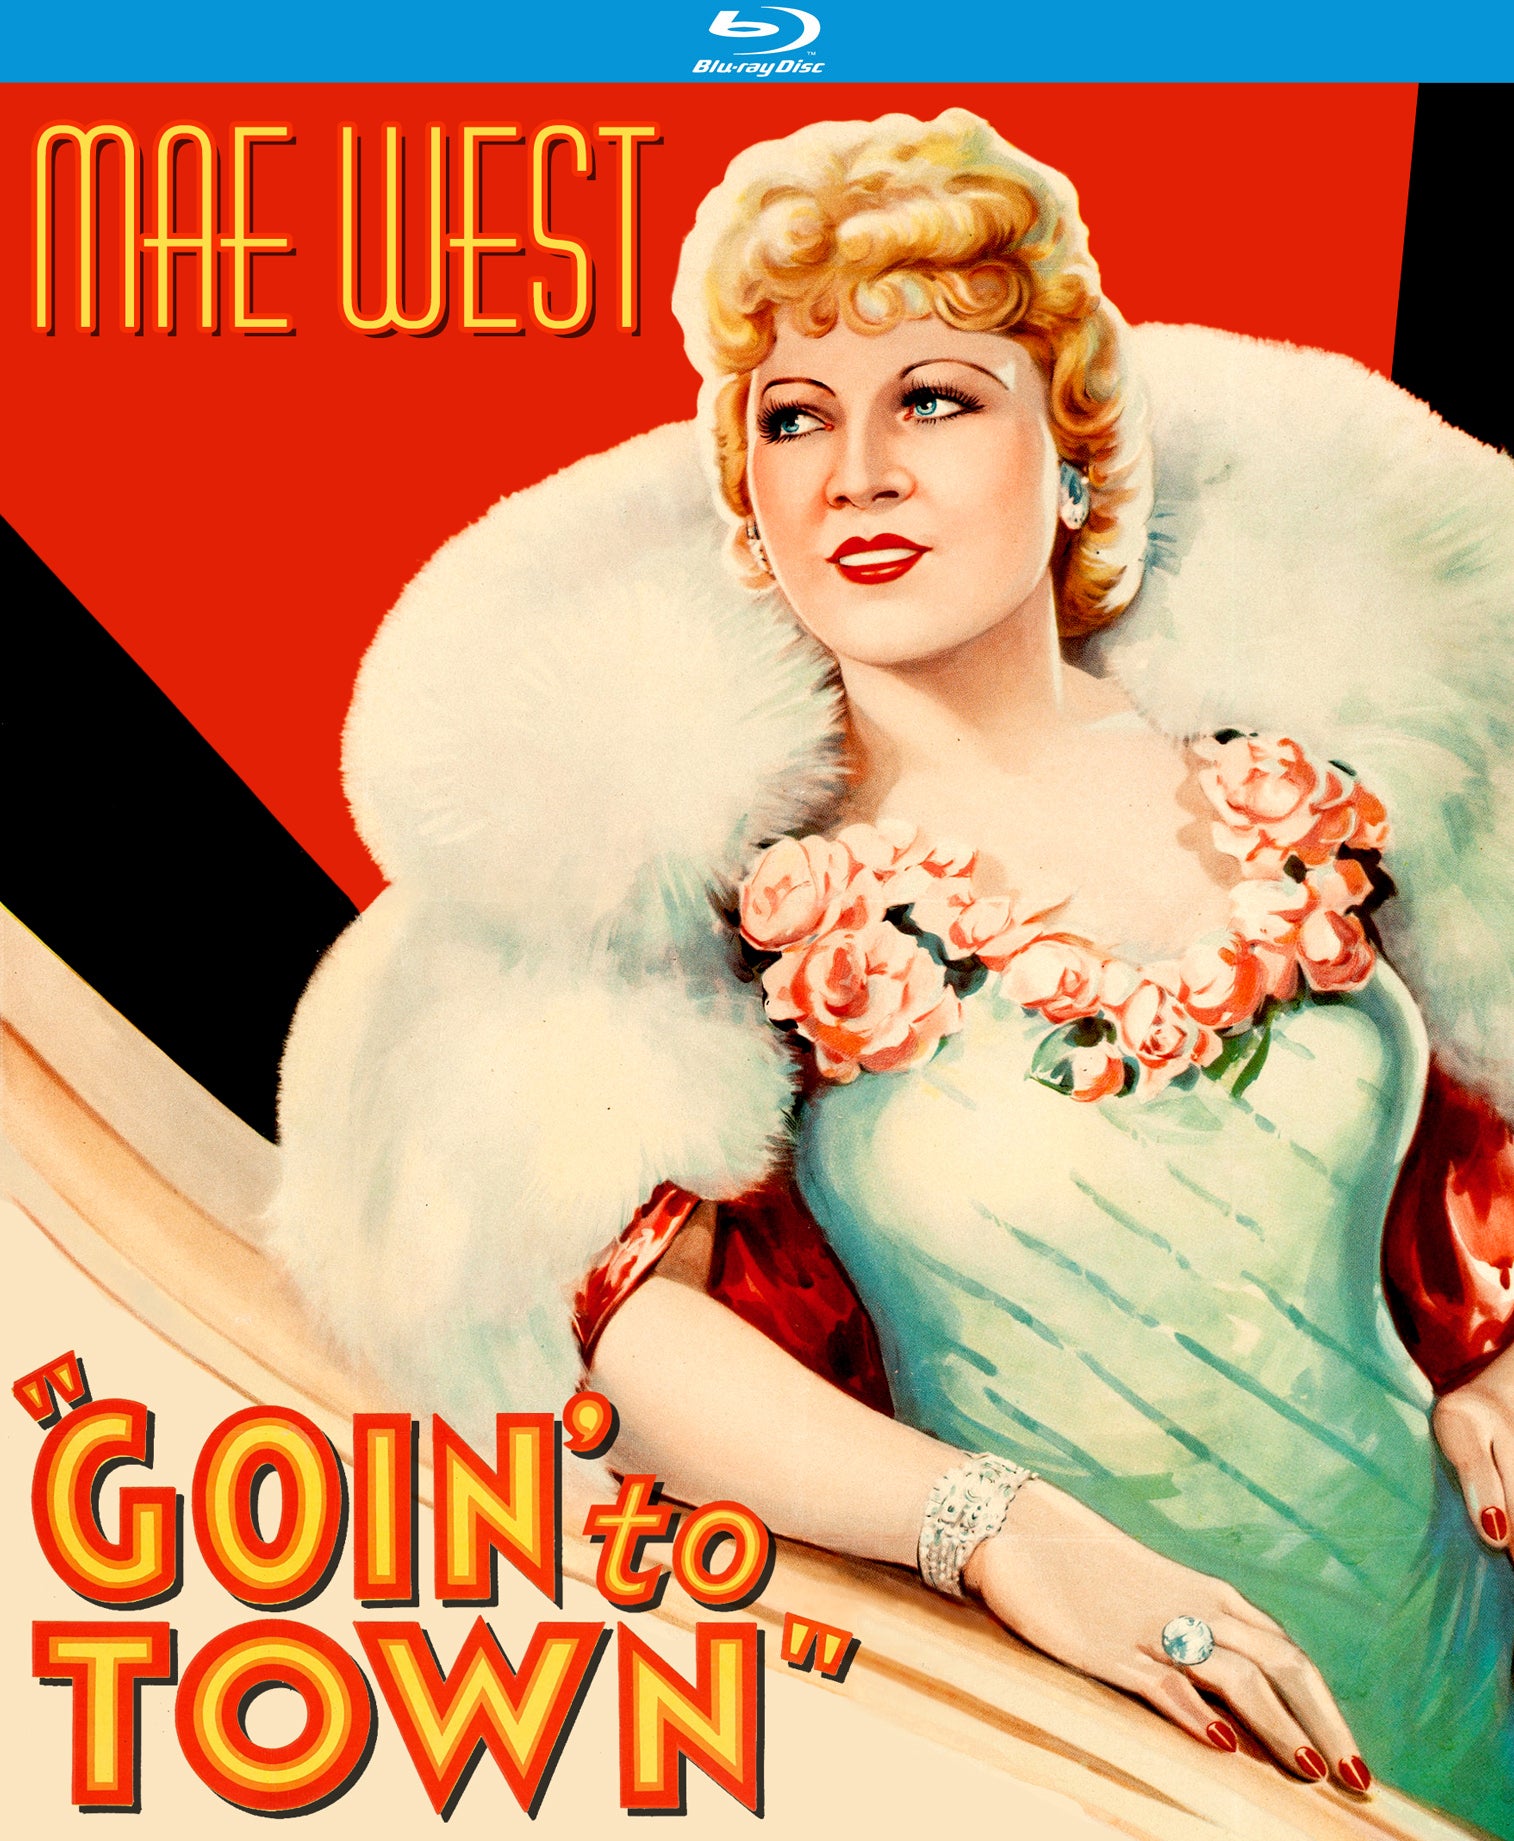 Goin' to Town [Blu-ray] cover art